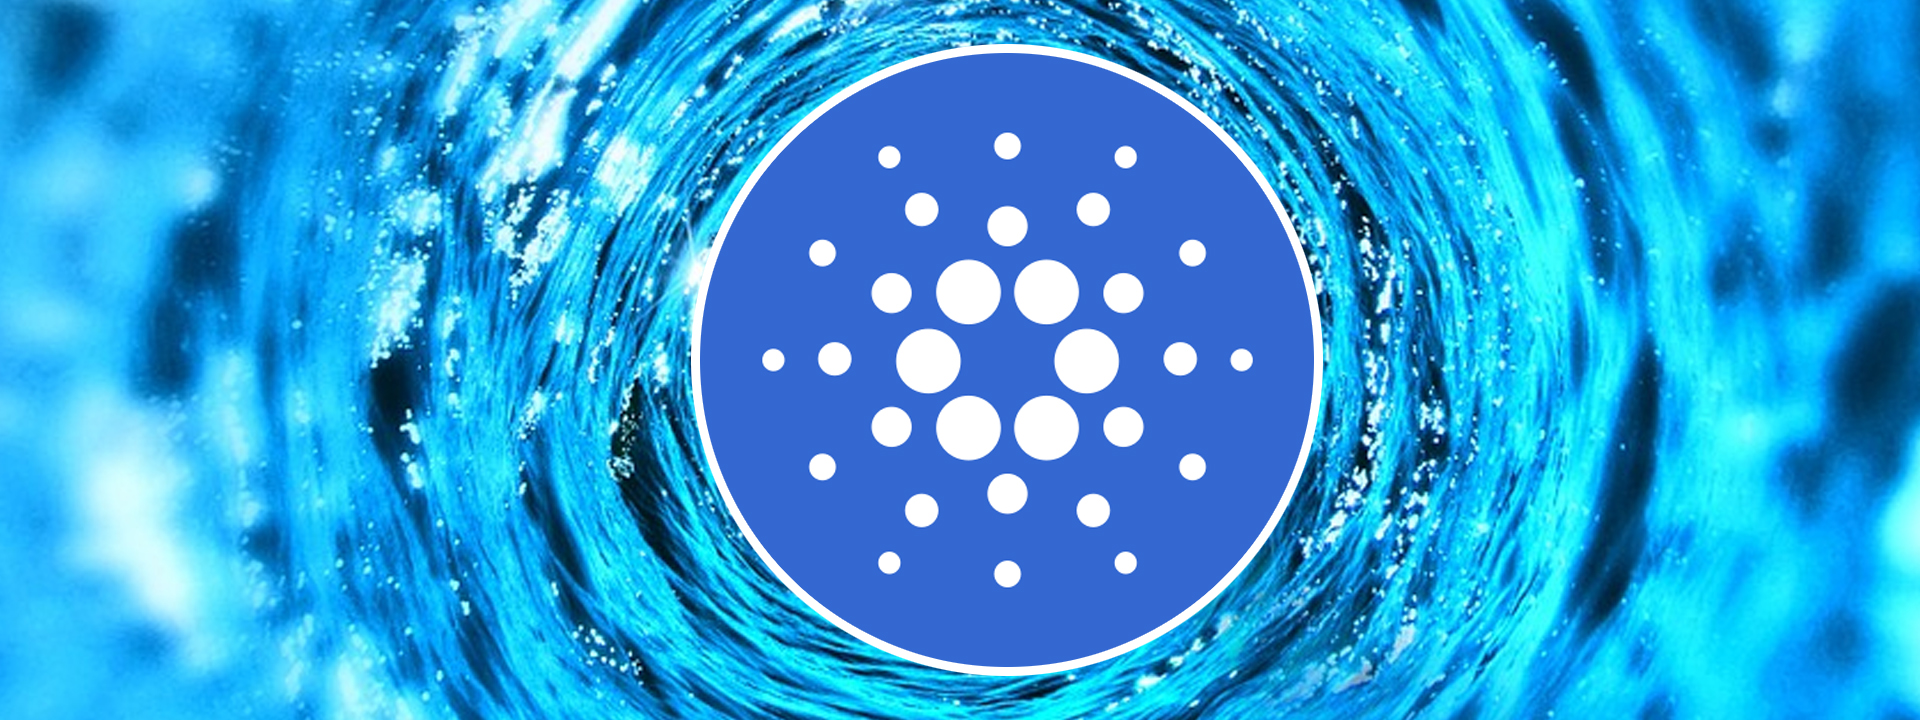 Cardano Price Analysis: Can ADA continue with its recent momentum lower to a psychological level $1.0